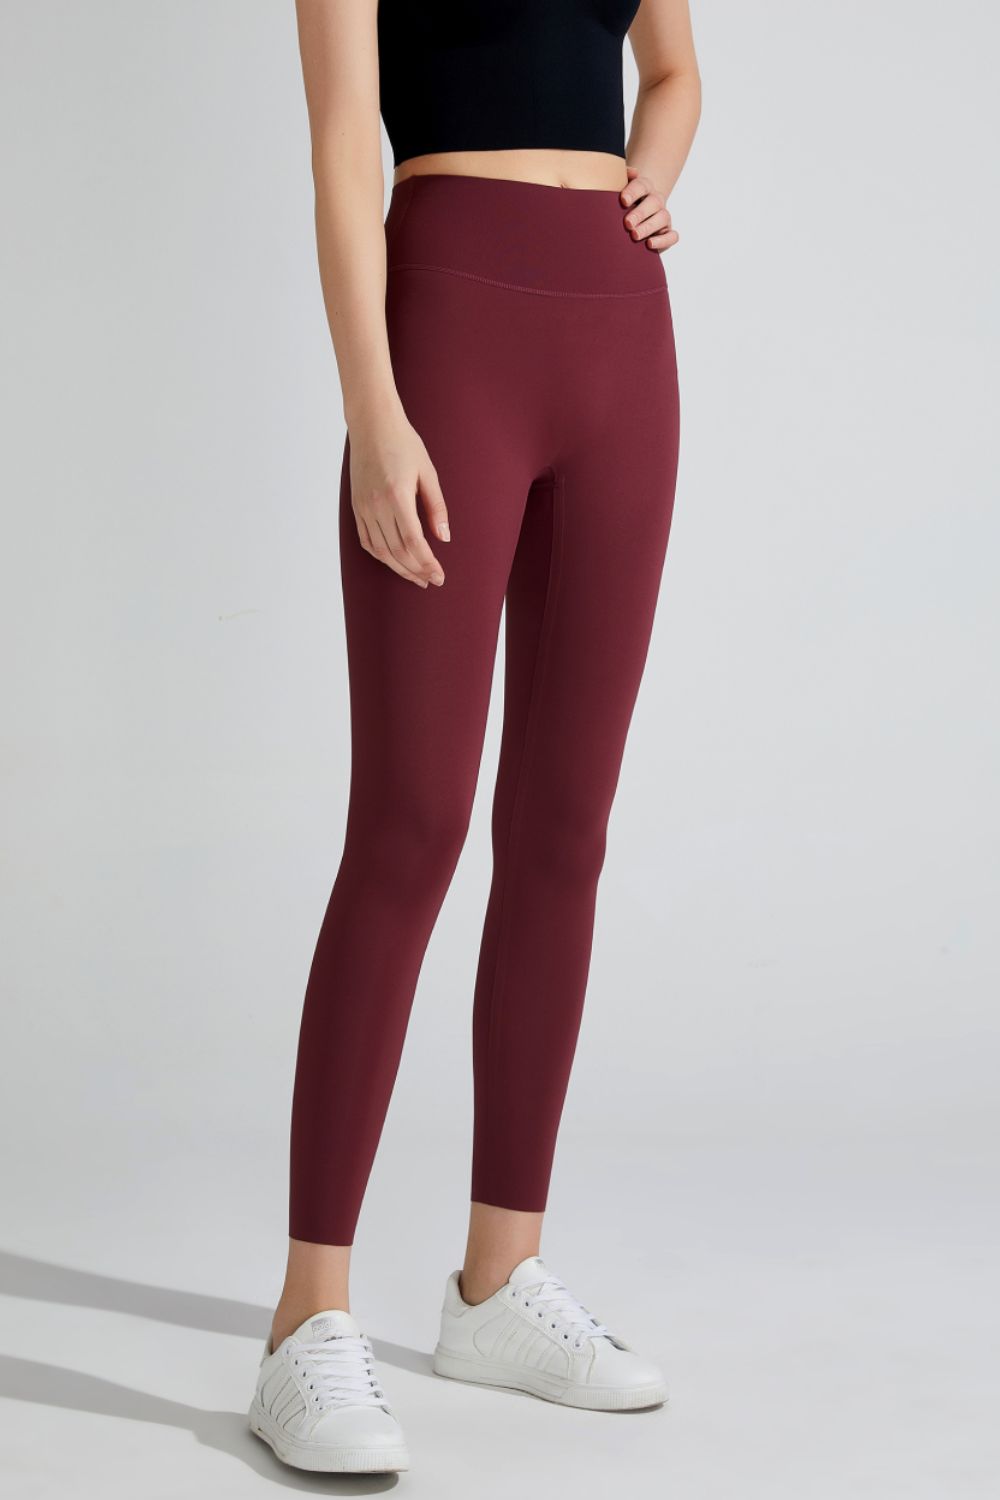 High Waist Breathable Sports Leggings - Red / S - Women’s Clothing & Accessories - Pants - 4 - 2024